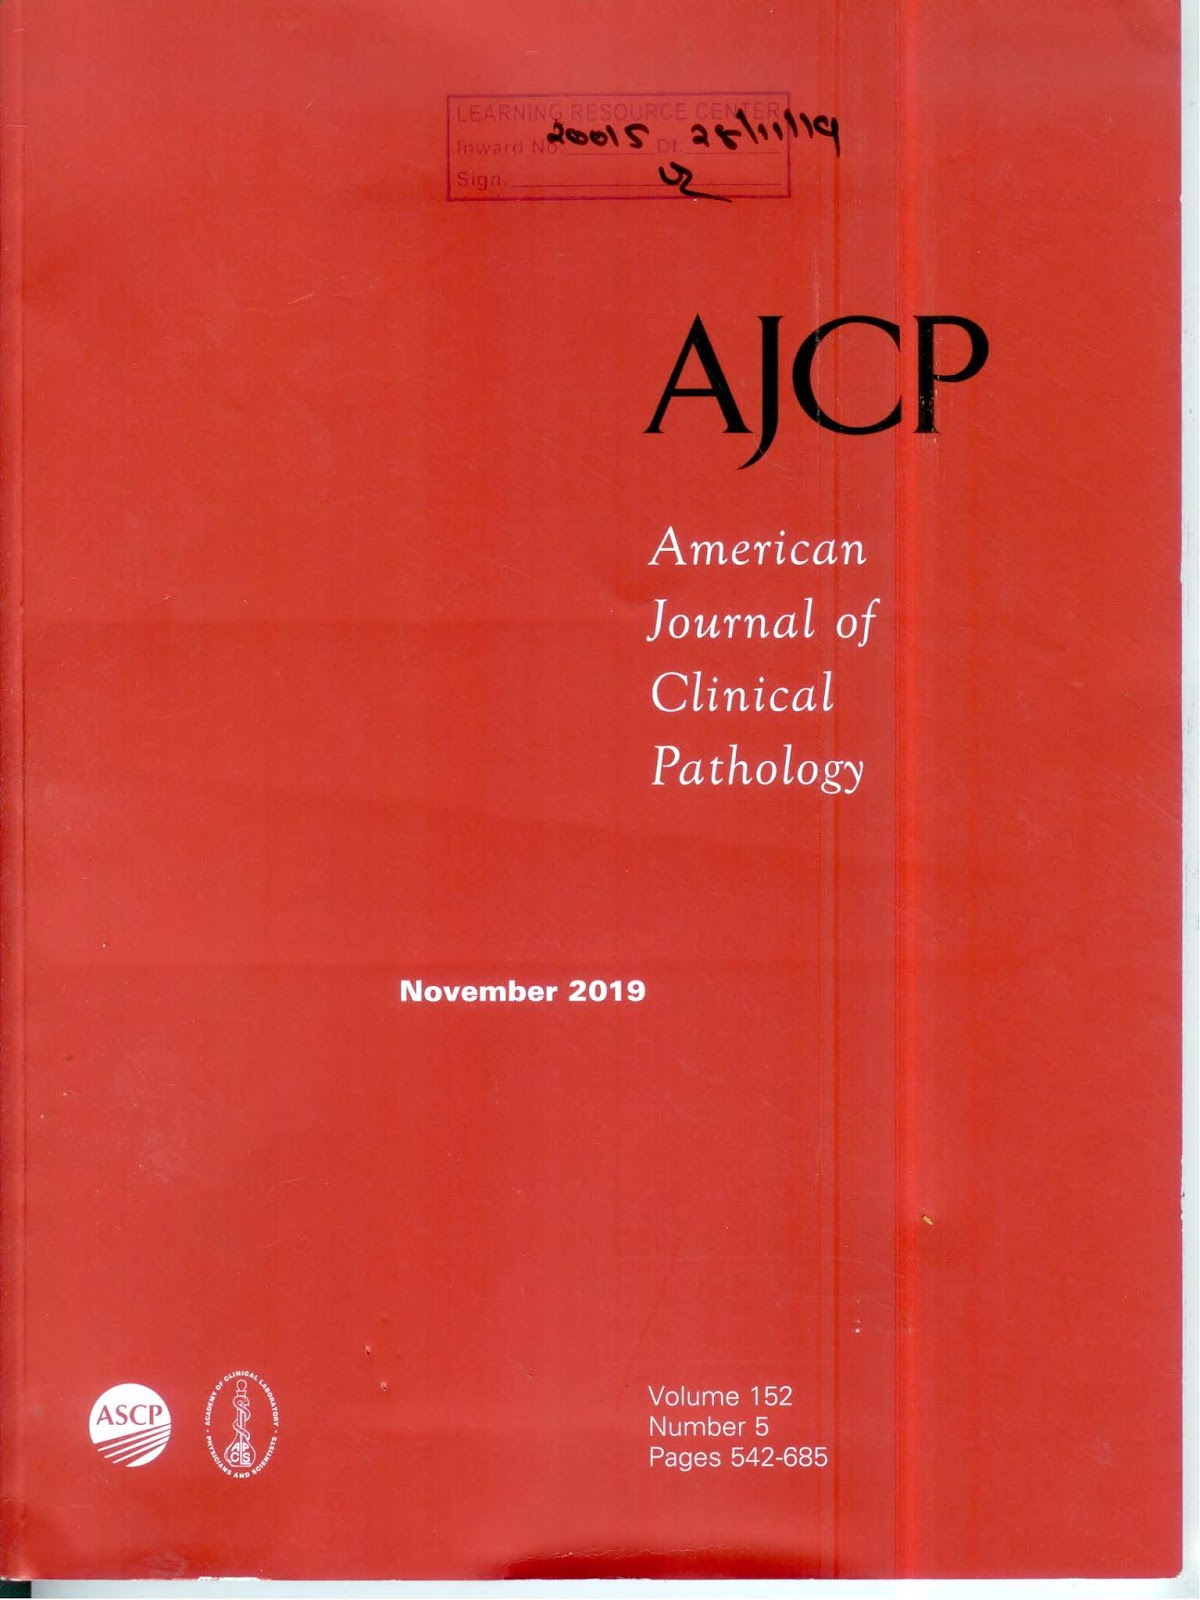 https://academic.oup.com/ajcp/issue/152/5